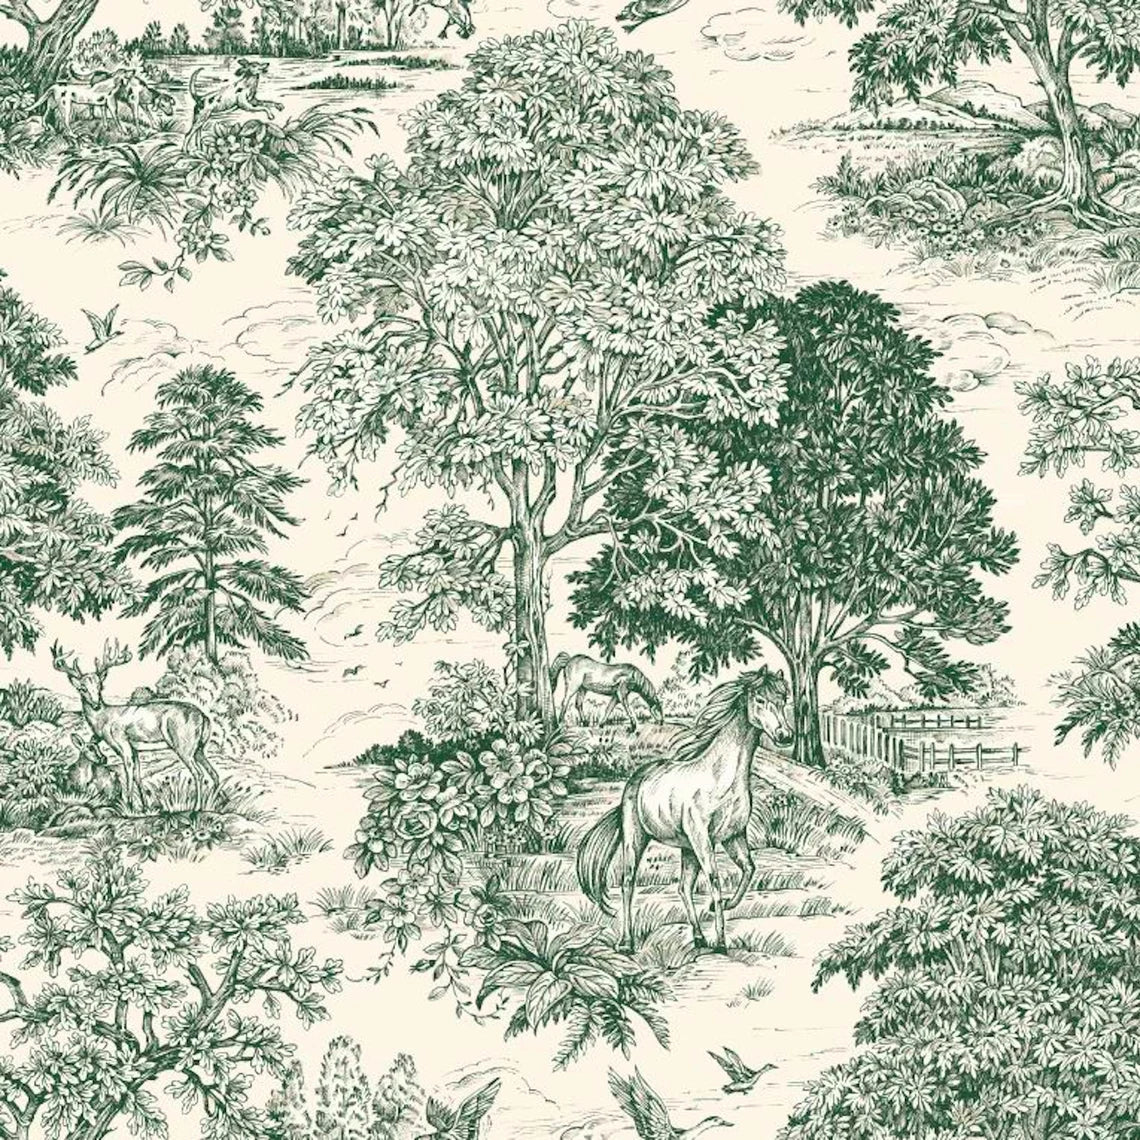 tab top curtain panels pair in Yellowstone Classic Green Country Toile- Horses, Deer, Dogs- Large Scale